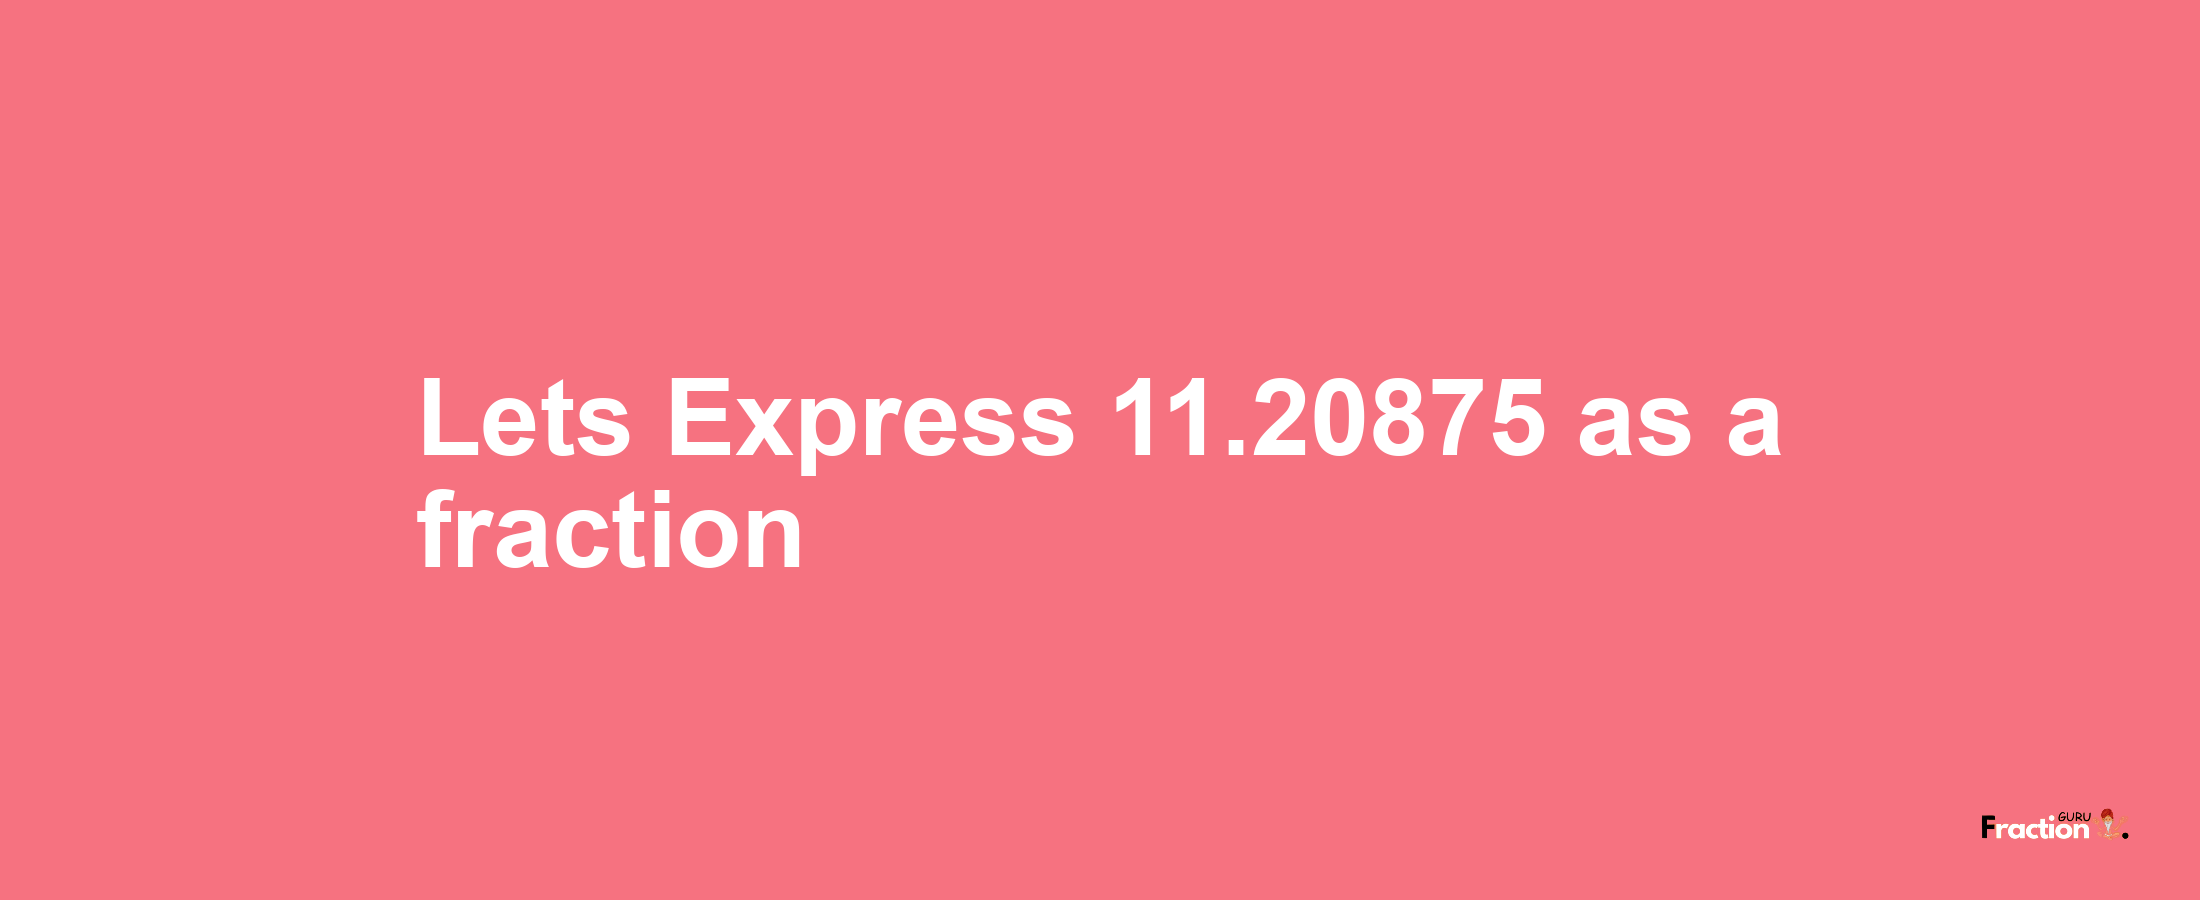 Lets Express 11.20875 as afraction